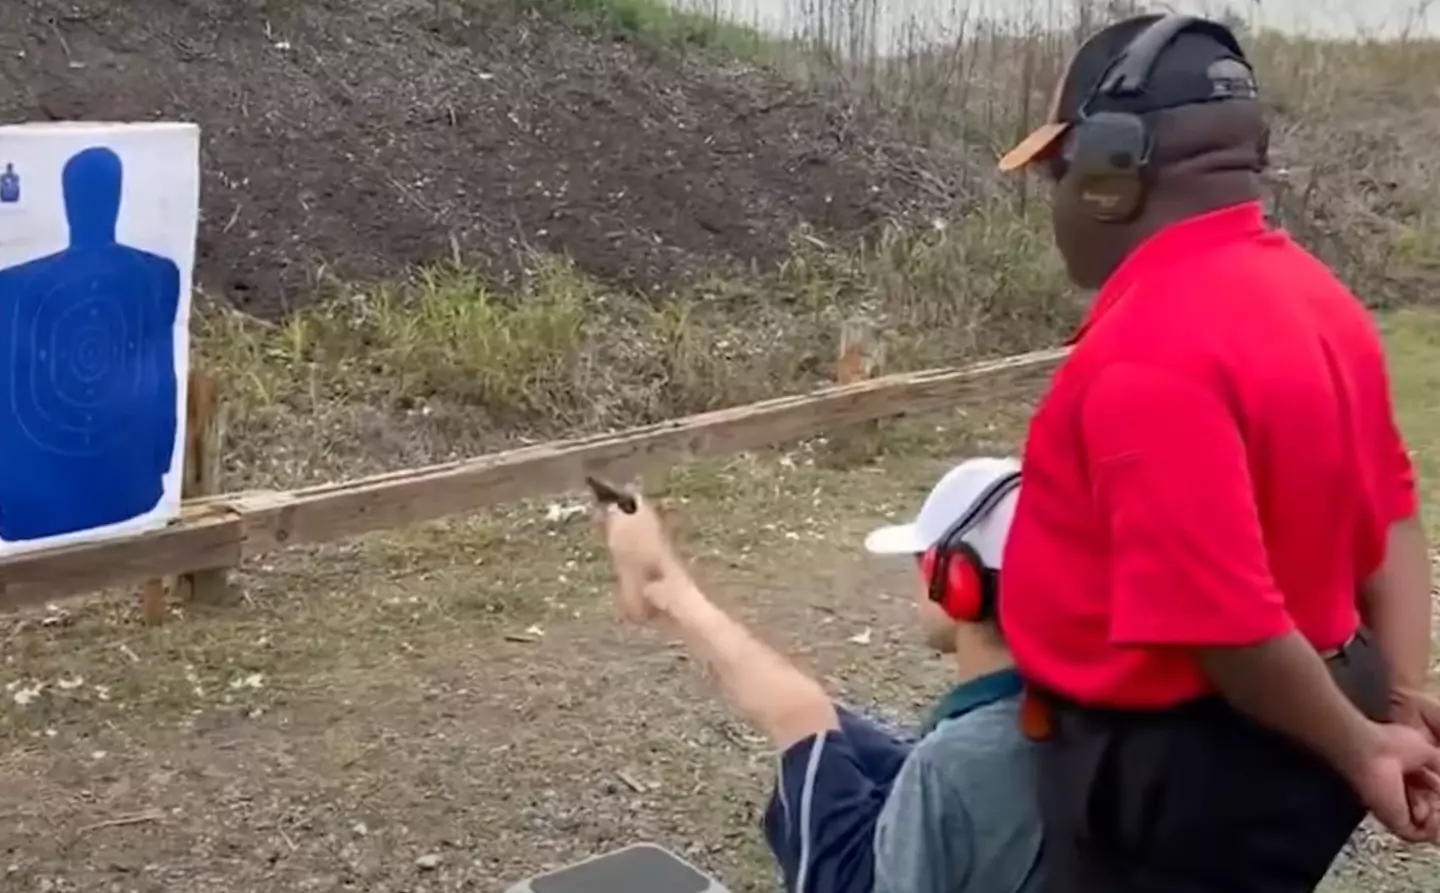 The determined student learned by using his feet to both reload and fire the gun.